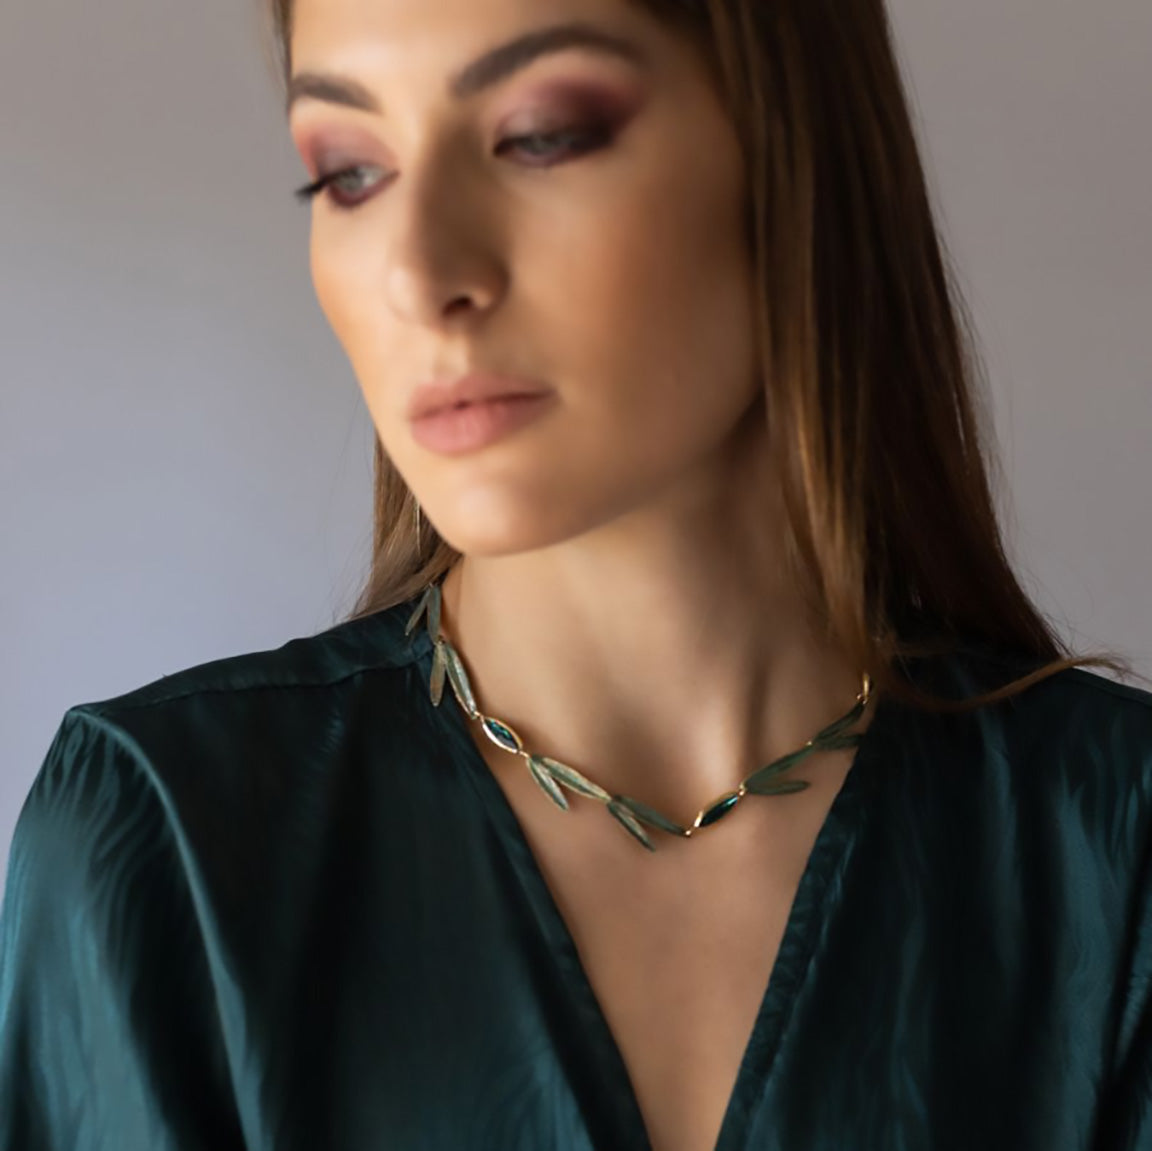 Kalliope Short Leaves Necklace: Greece Fashion Jewelry